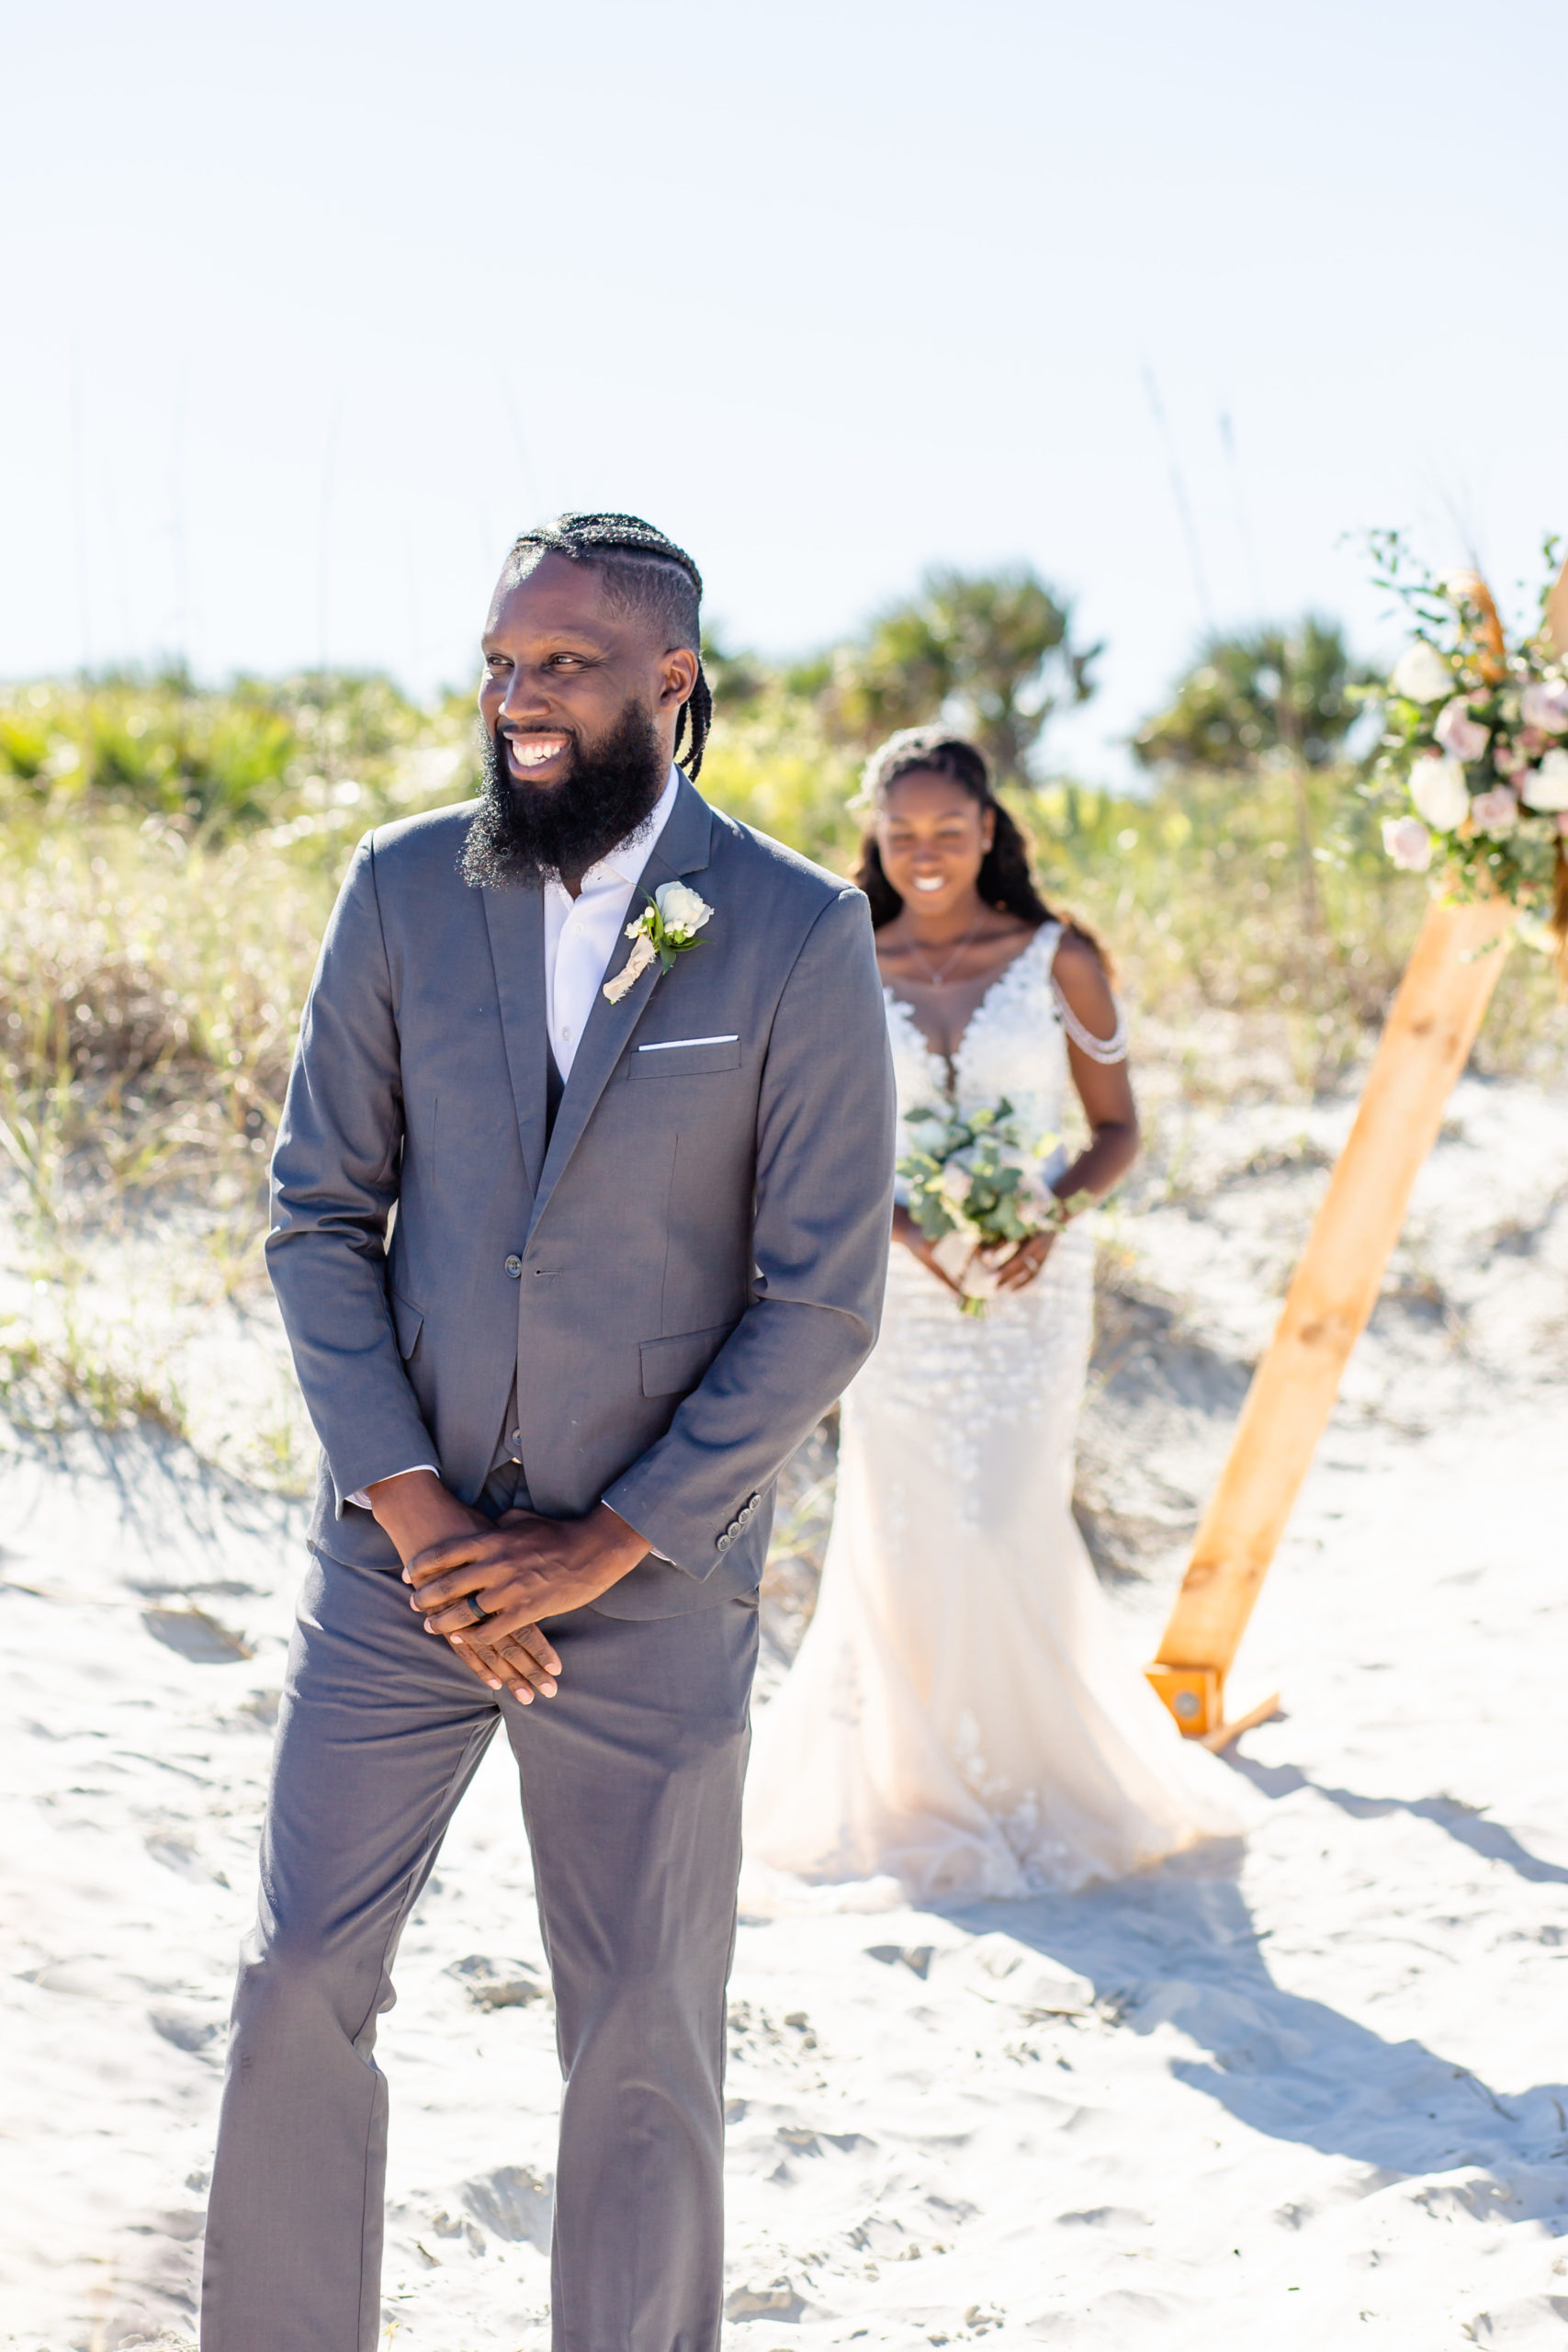 Groom in gray suit with white shirt on the beach